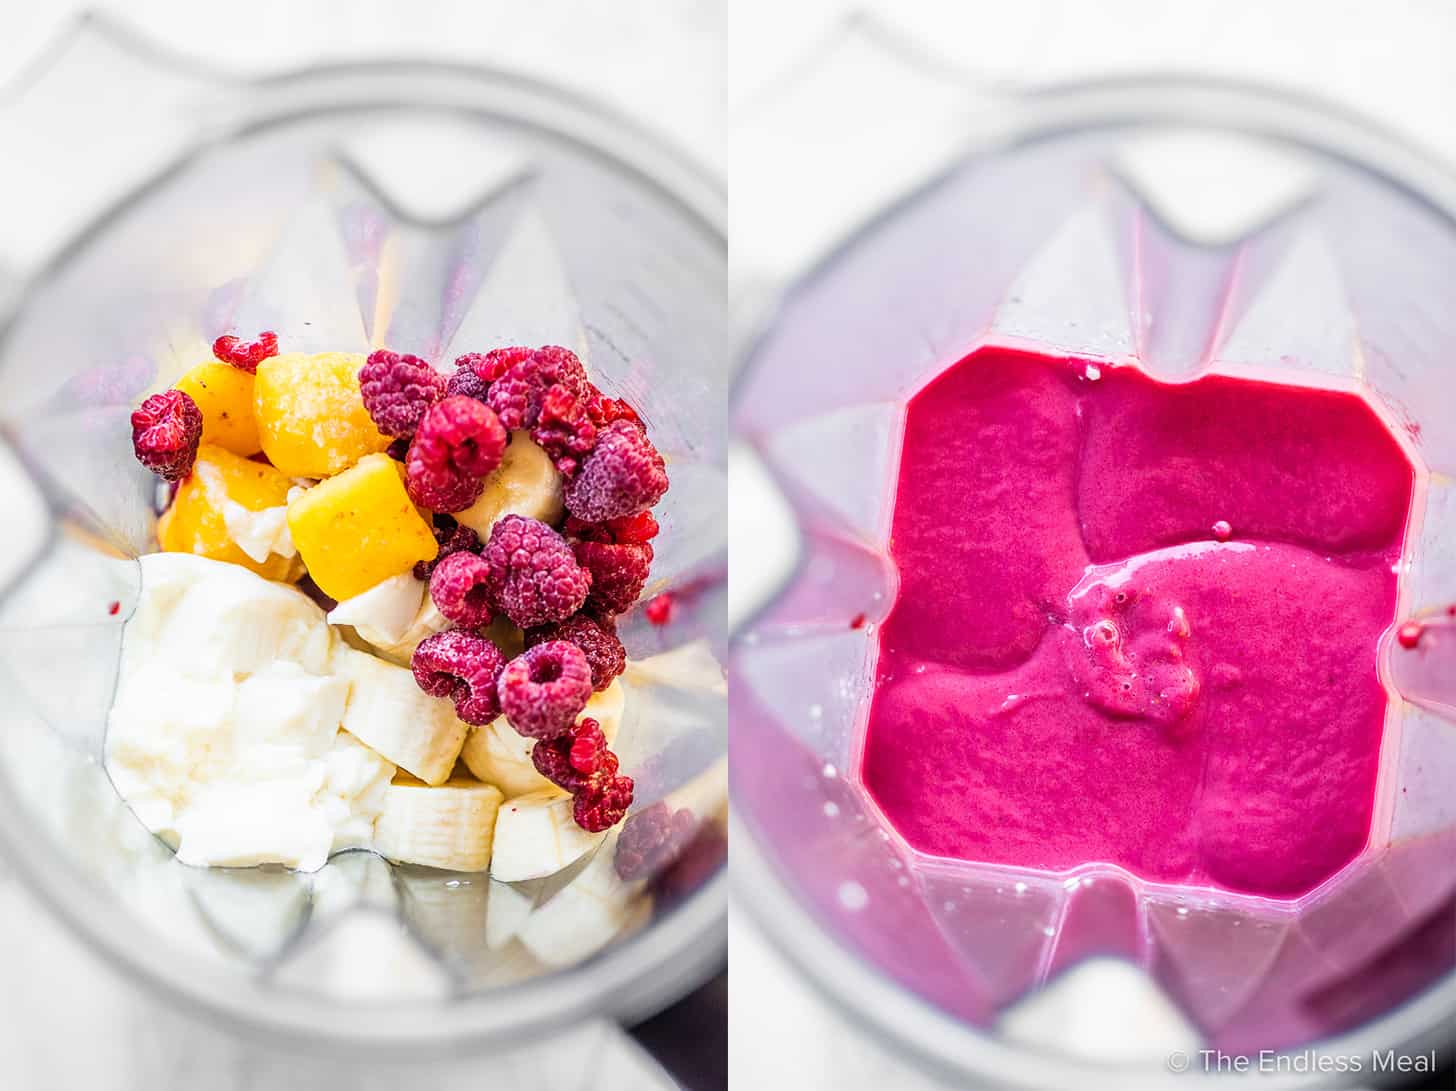 2 pictures showing how to make a tofu smoothie.